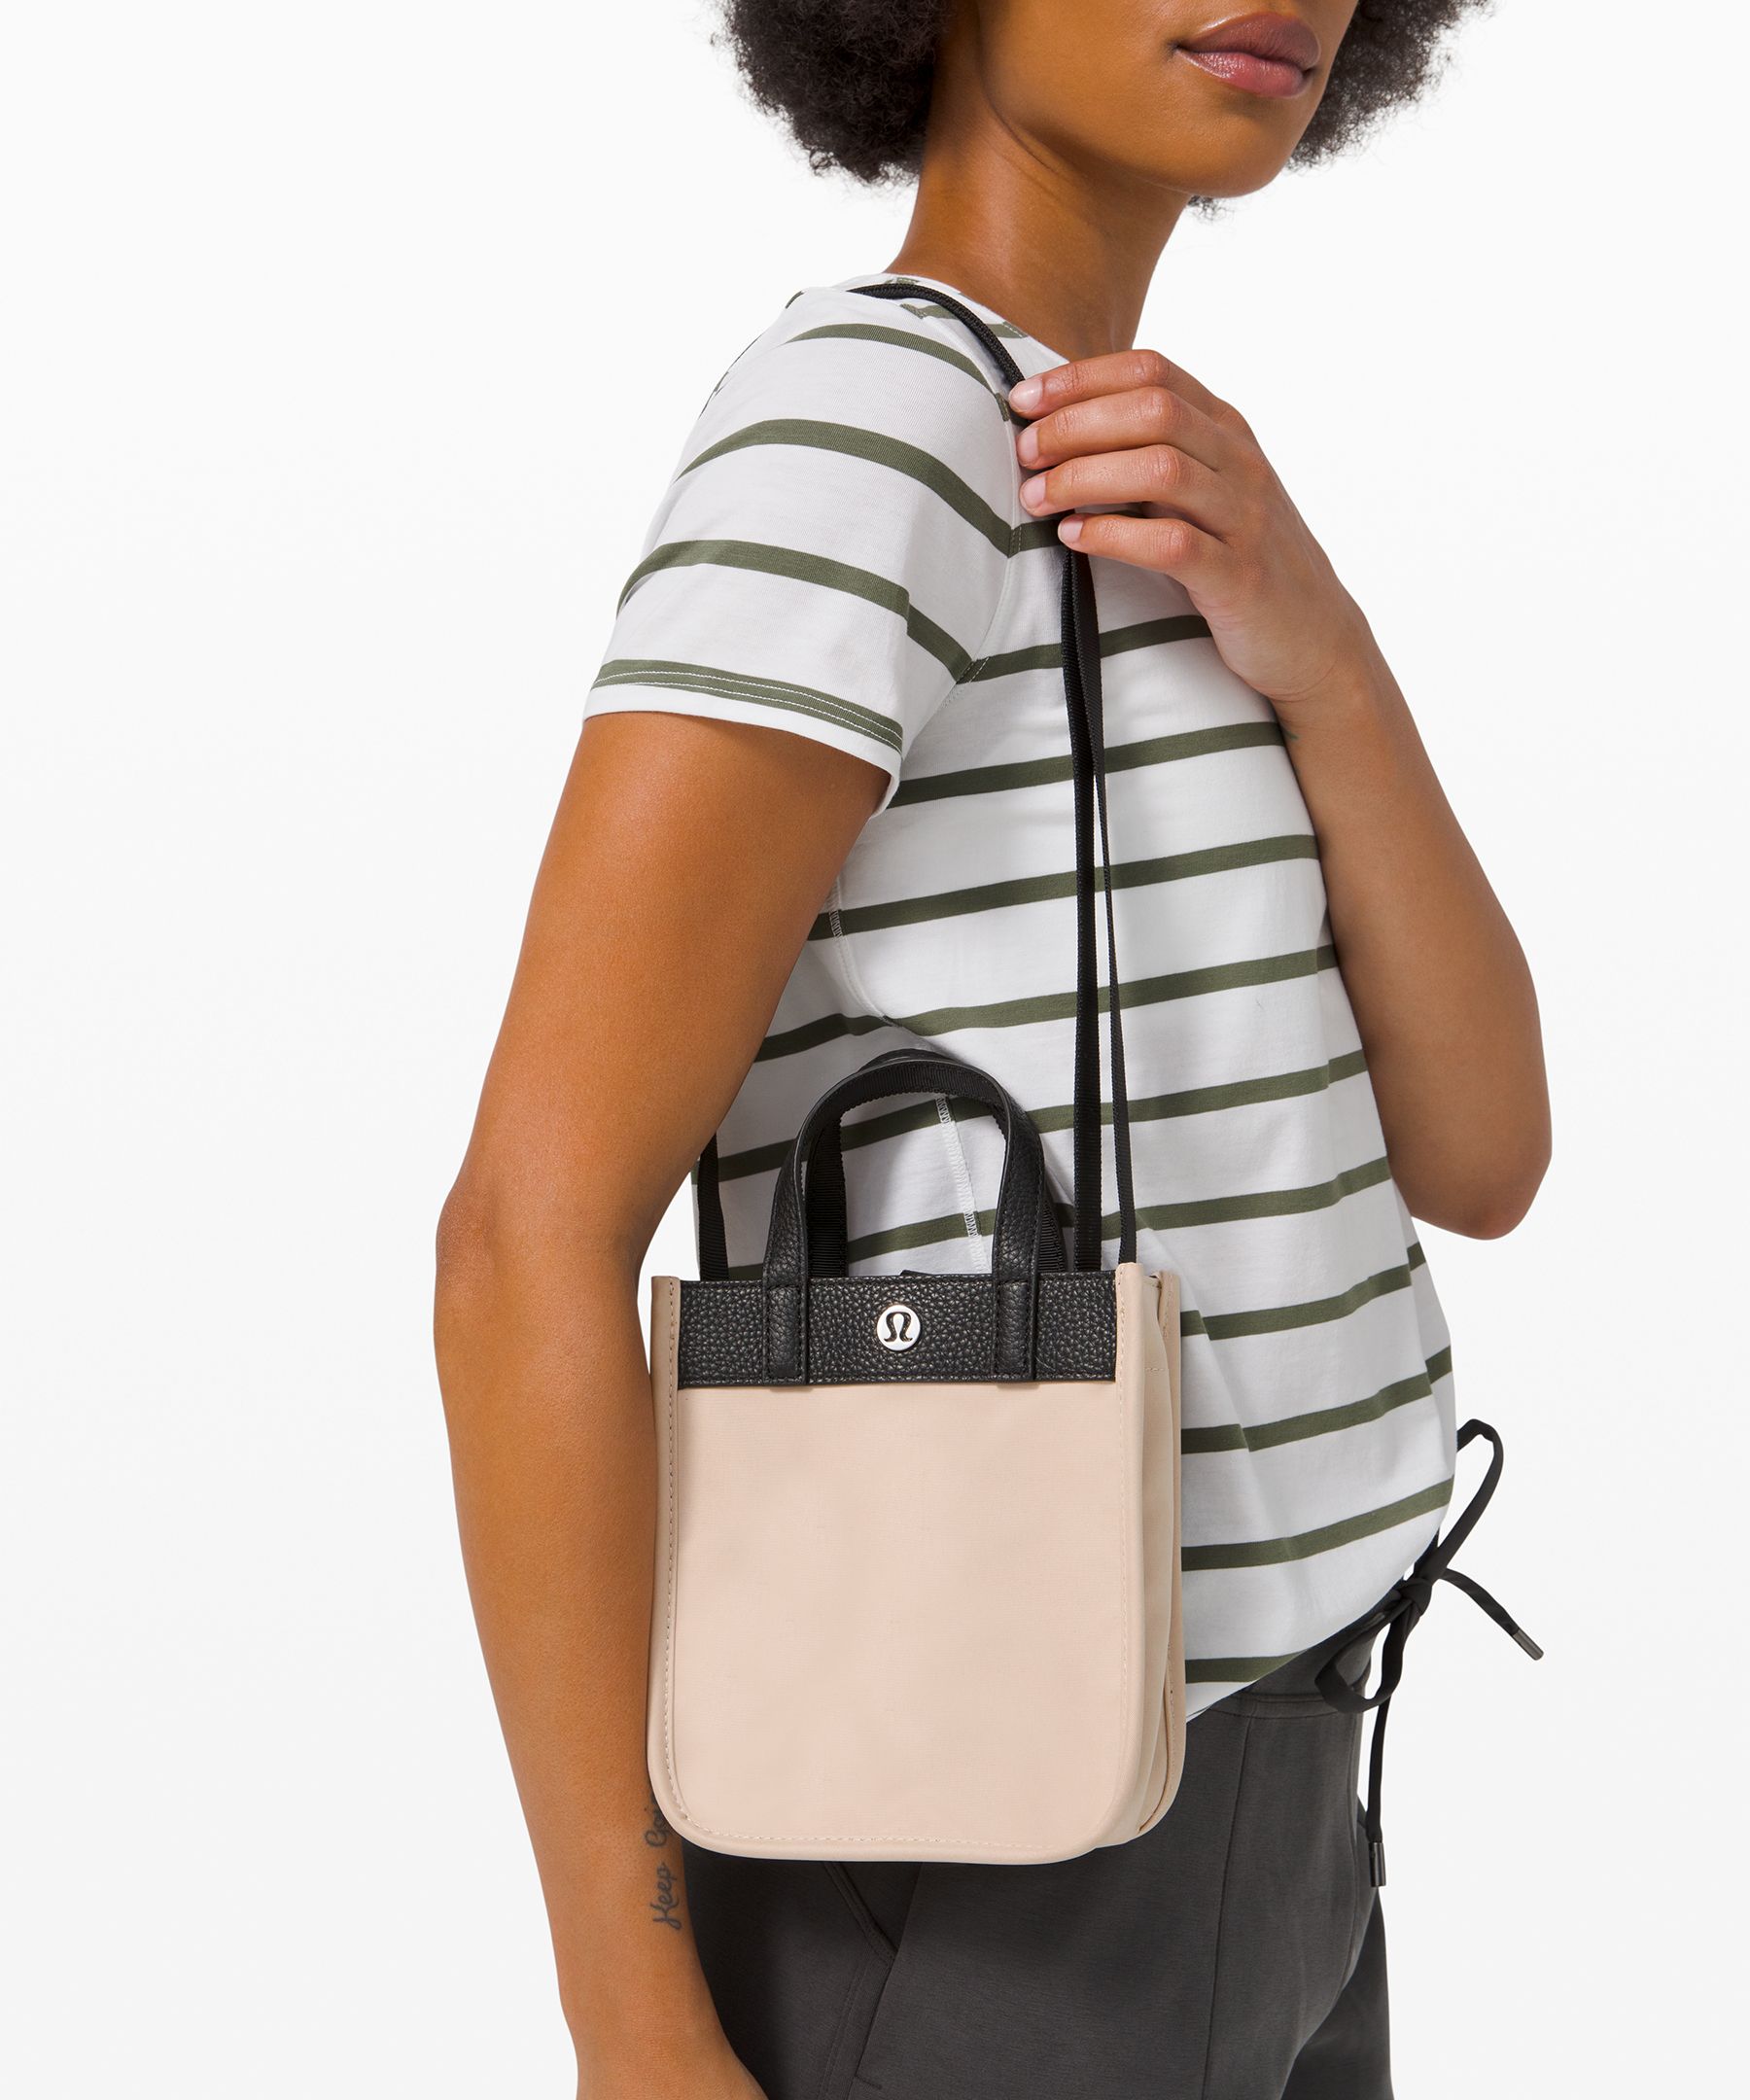 lululemon now and always tote